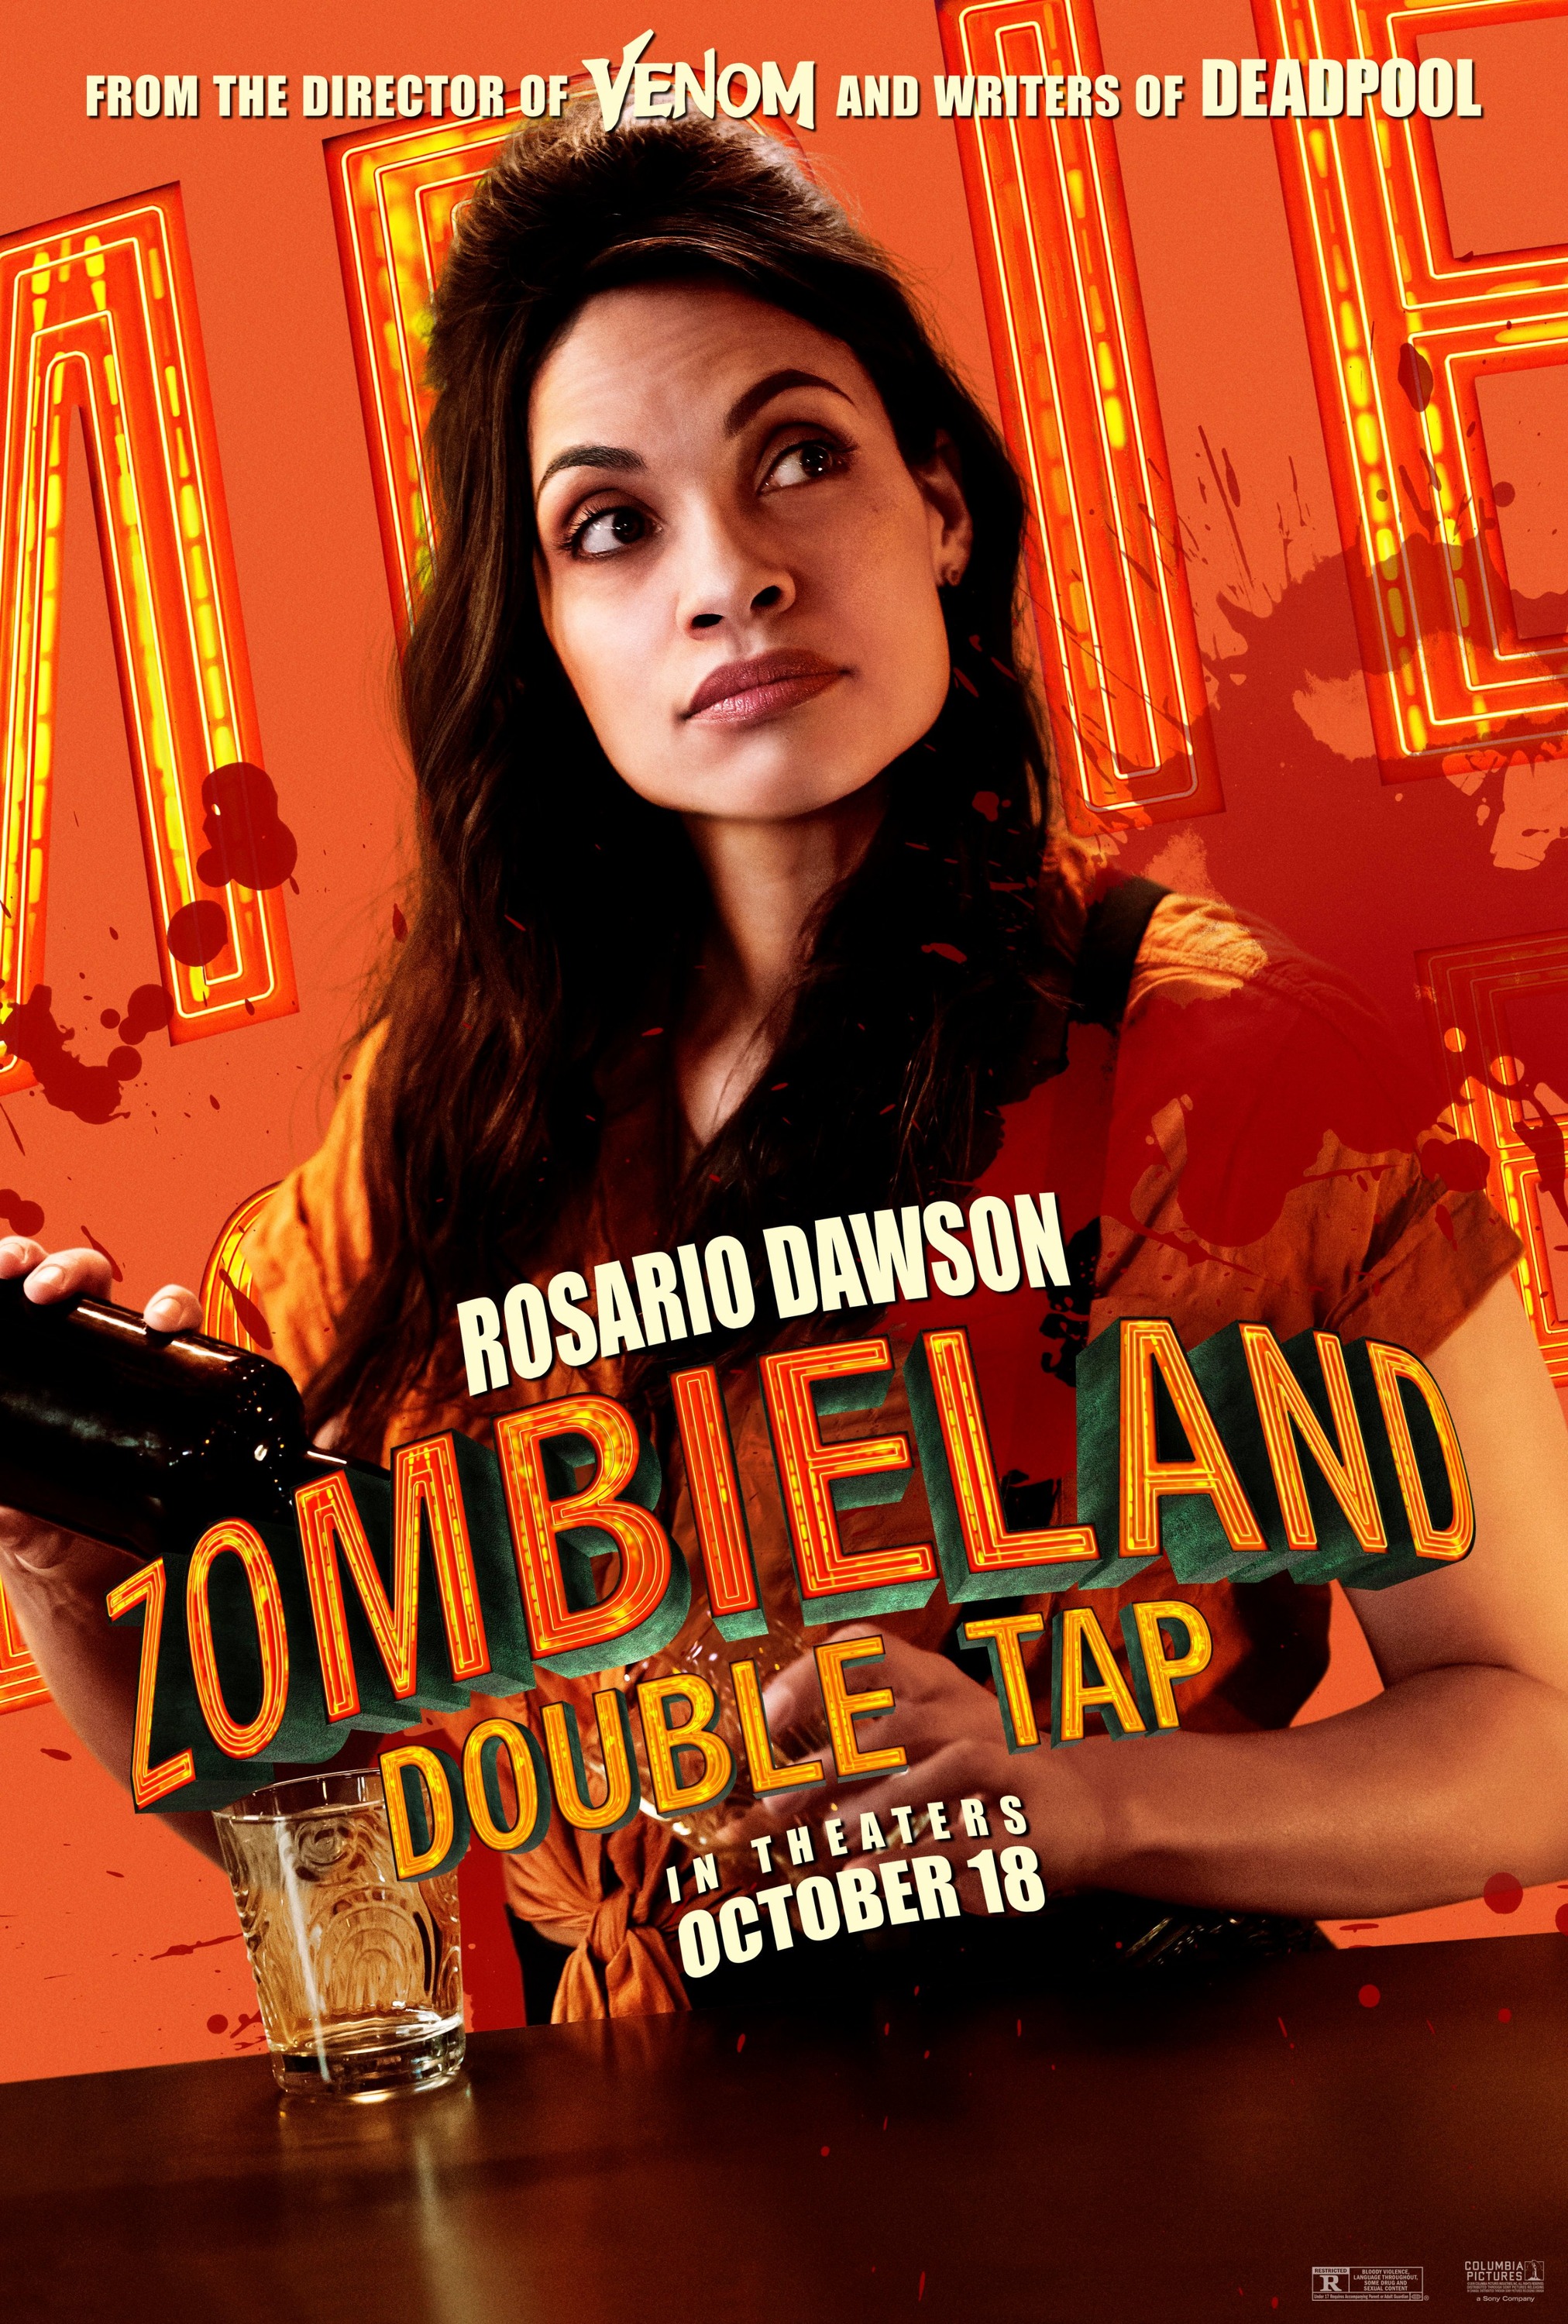  Zombieland: Double Tap (2019) Character Poster - Rosario Dawson as Nevada